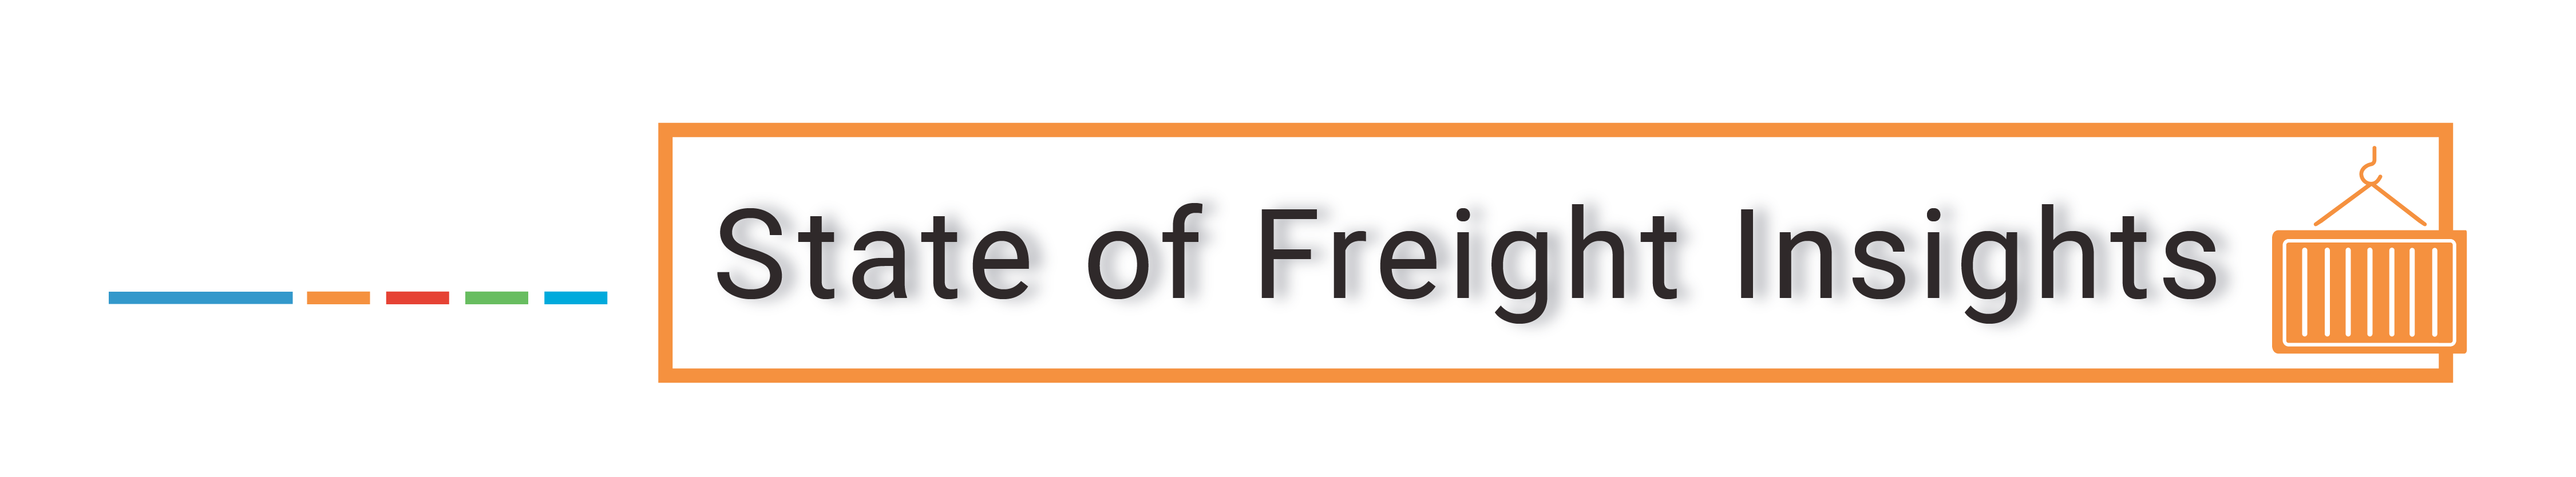 FTR 2022 Subscriptions Product Sublogos_light version_State of Freight Insights